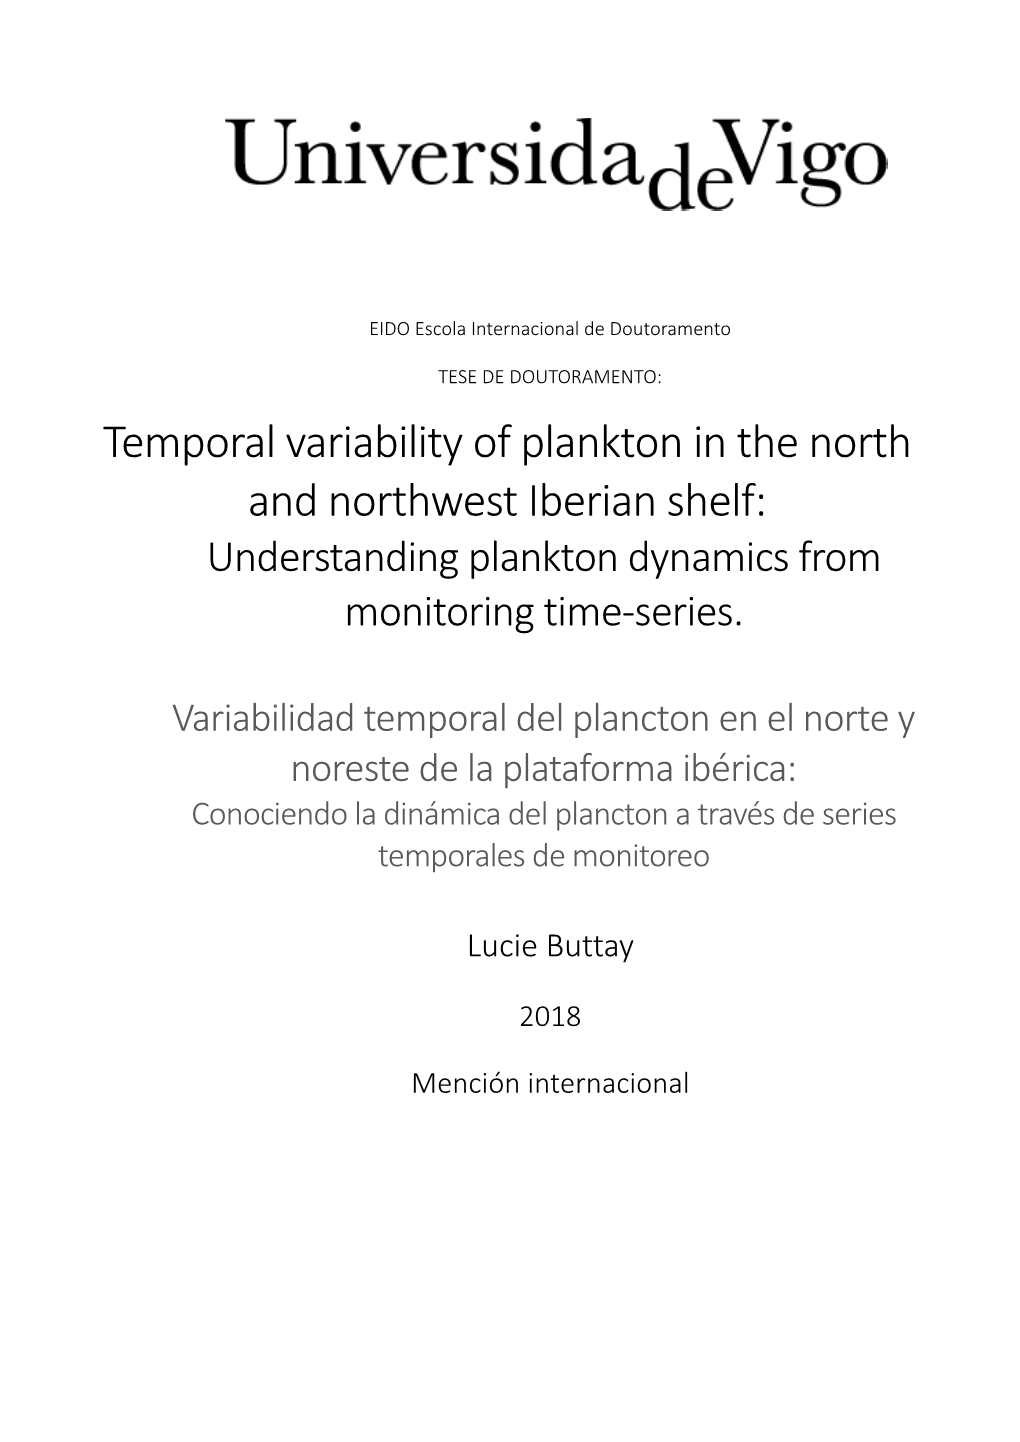 Temporal Variability of Plankton in the North and Northwest Iberian Shelf: Understanding Plankton Dynamics from Monitoring Time-Series